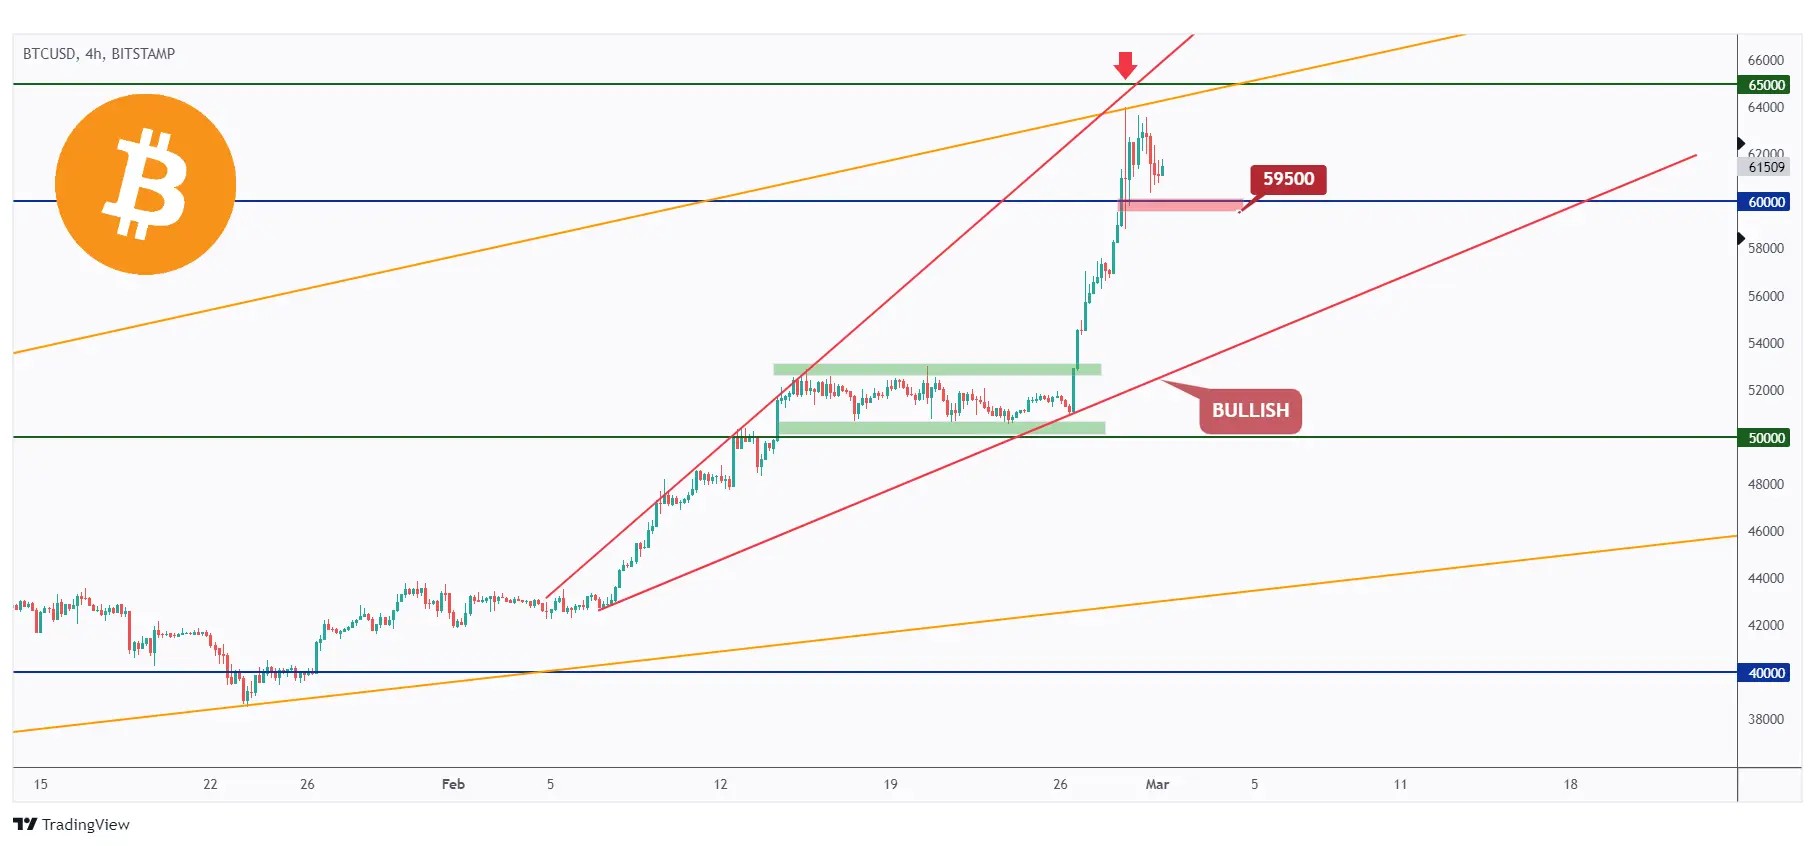 BTC 4h chart overall bullish trading inside two wedge patterns. However it is currently hovering around the upper bound of the wedge patterns.